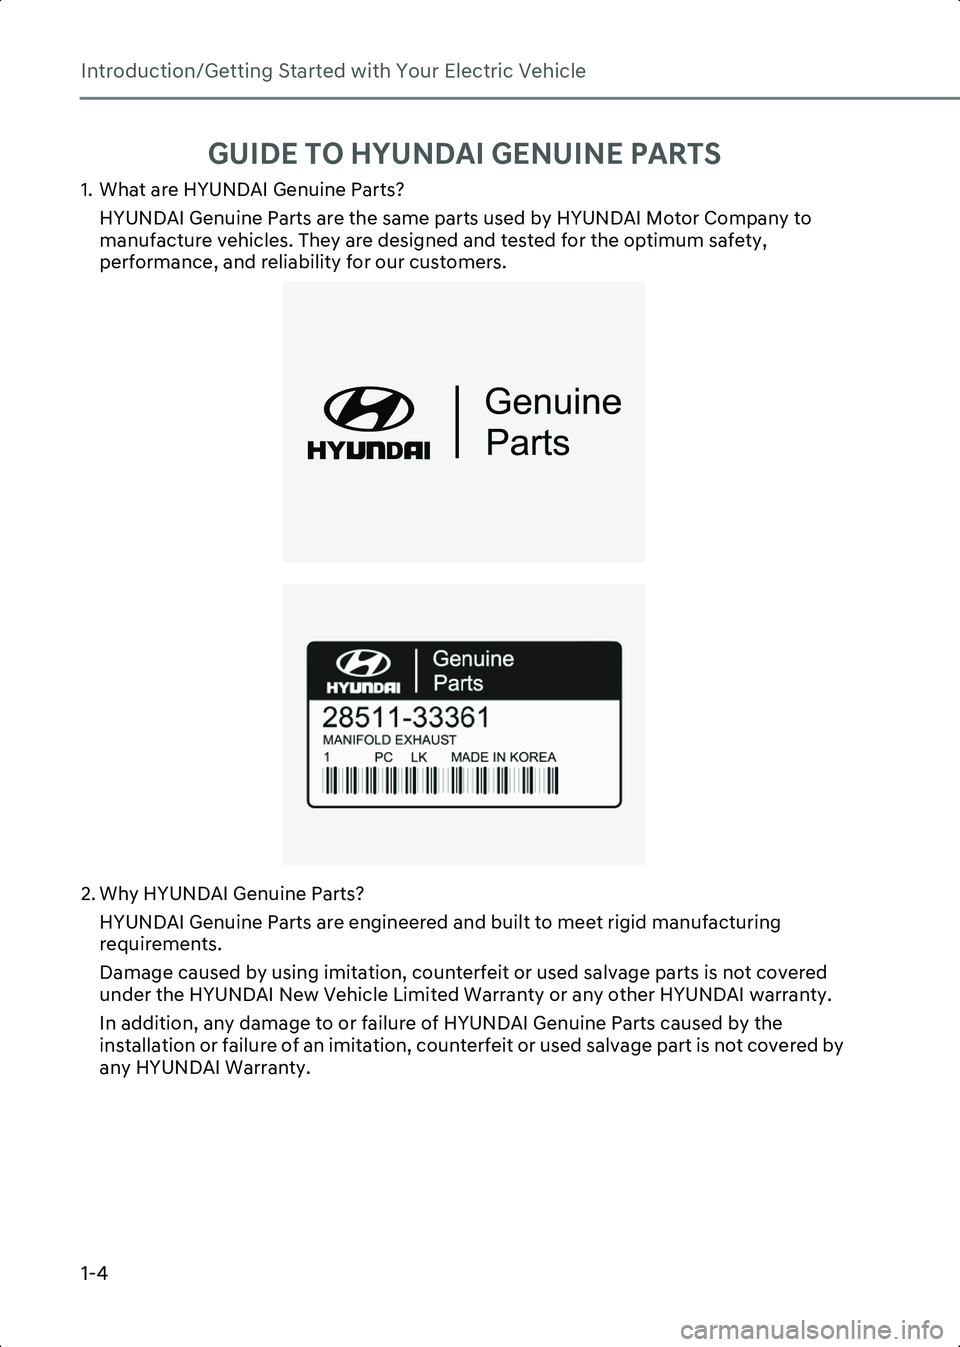 HYUNDAI IONIQ 6 2023  Owners Manual Introduction/Getting Started with Your Electric Vehicle
1-4
GUIDE TO HYUNDAI GENUINE PARTS
1. What are HYUNDAI Genuine Parts?HYUNDAI Genuine Parts are the same parts used by HYUNDAI Motor Company to 
